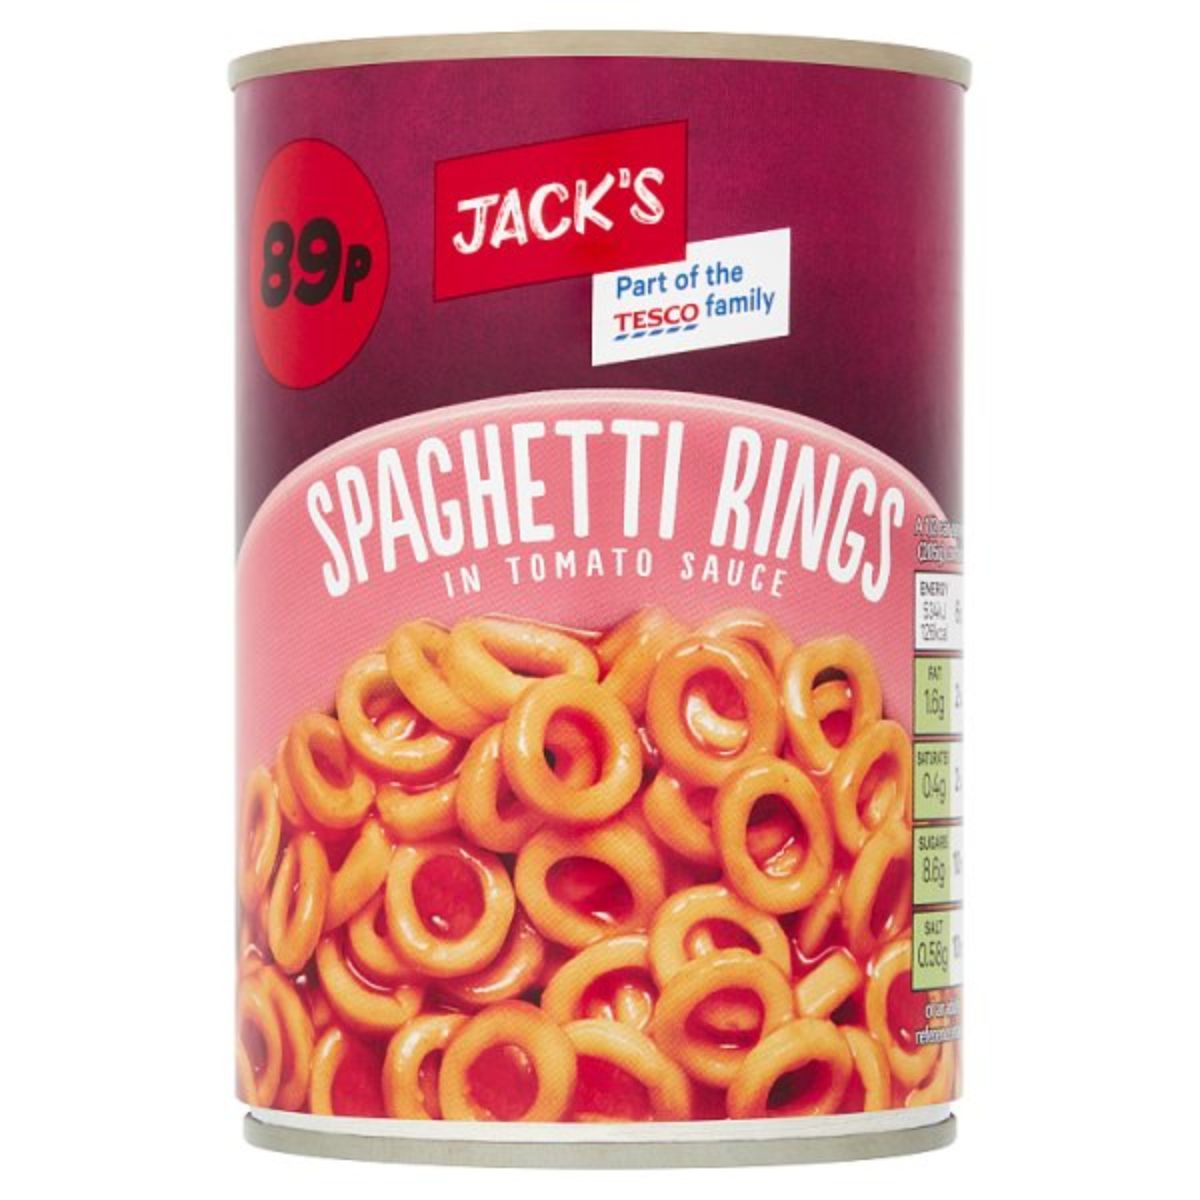 Jacks - Spaghetti Rings in Tomato Sauce - 410g in a can.